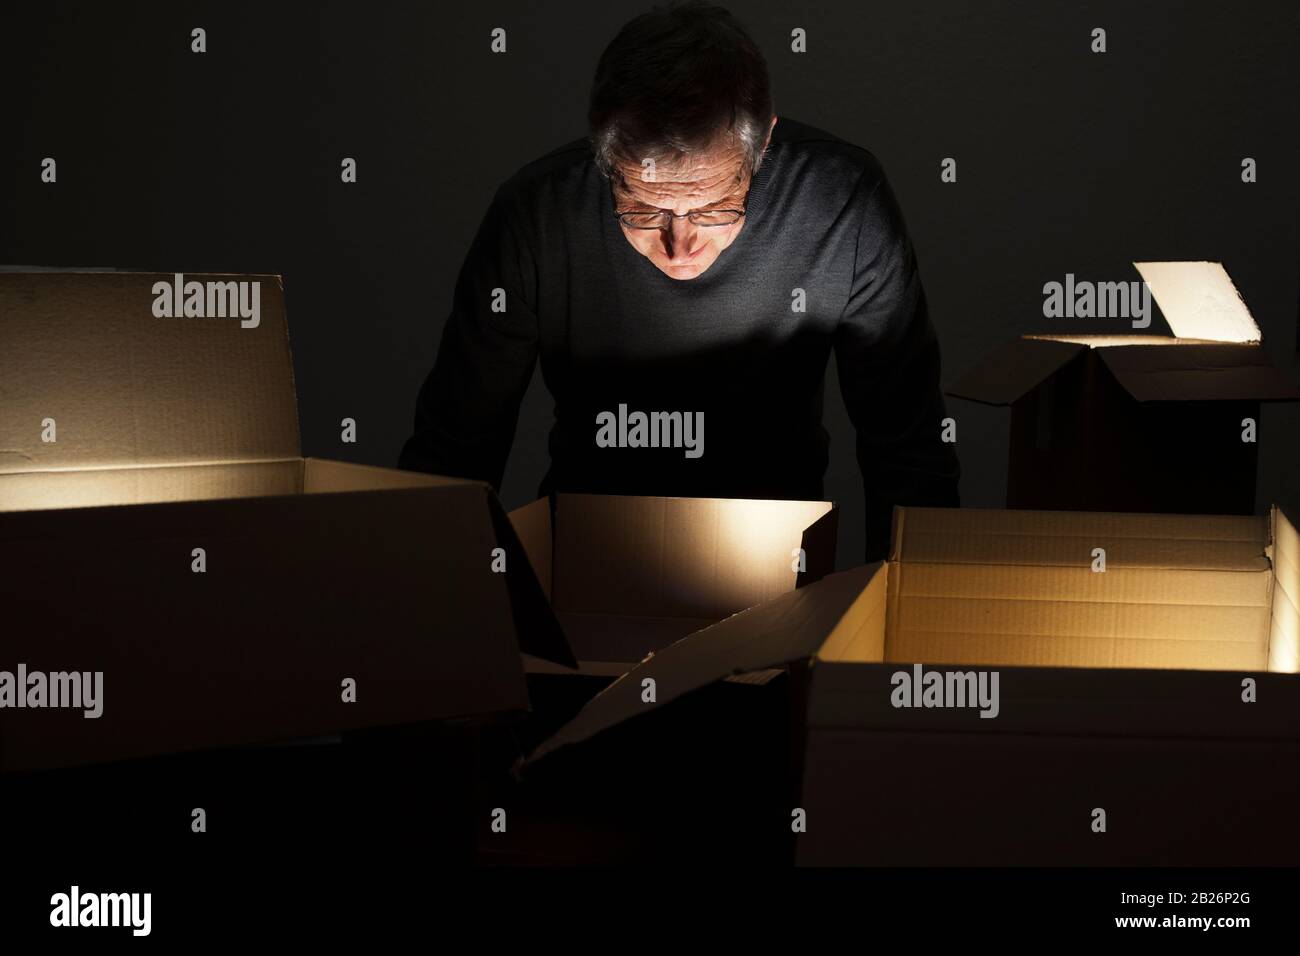 Mature curious man opening parcels with lights inside Stock Photo